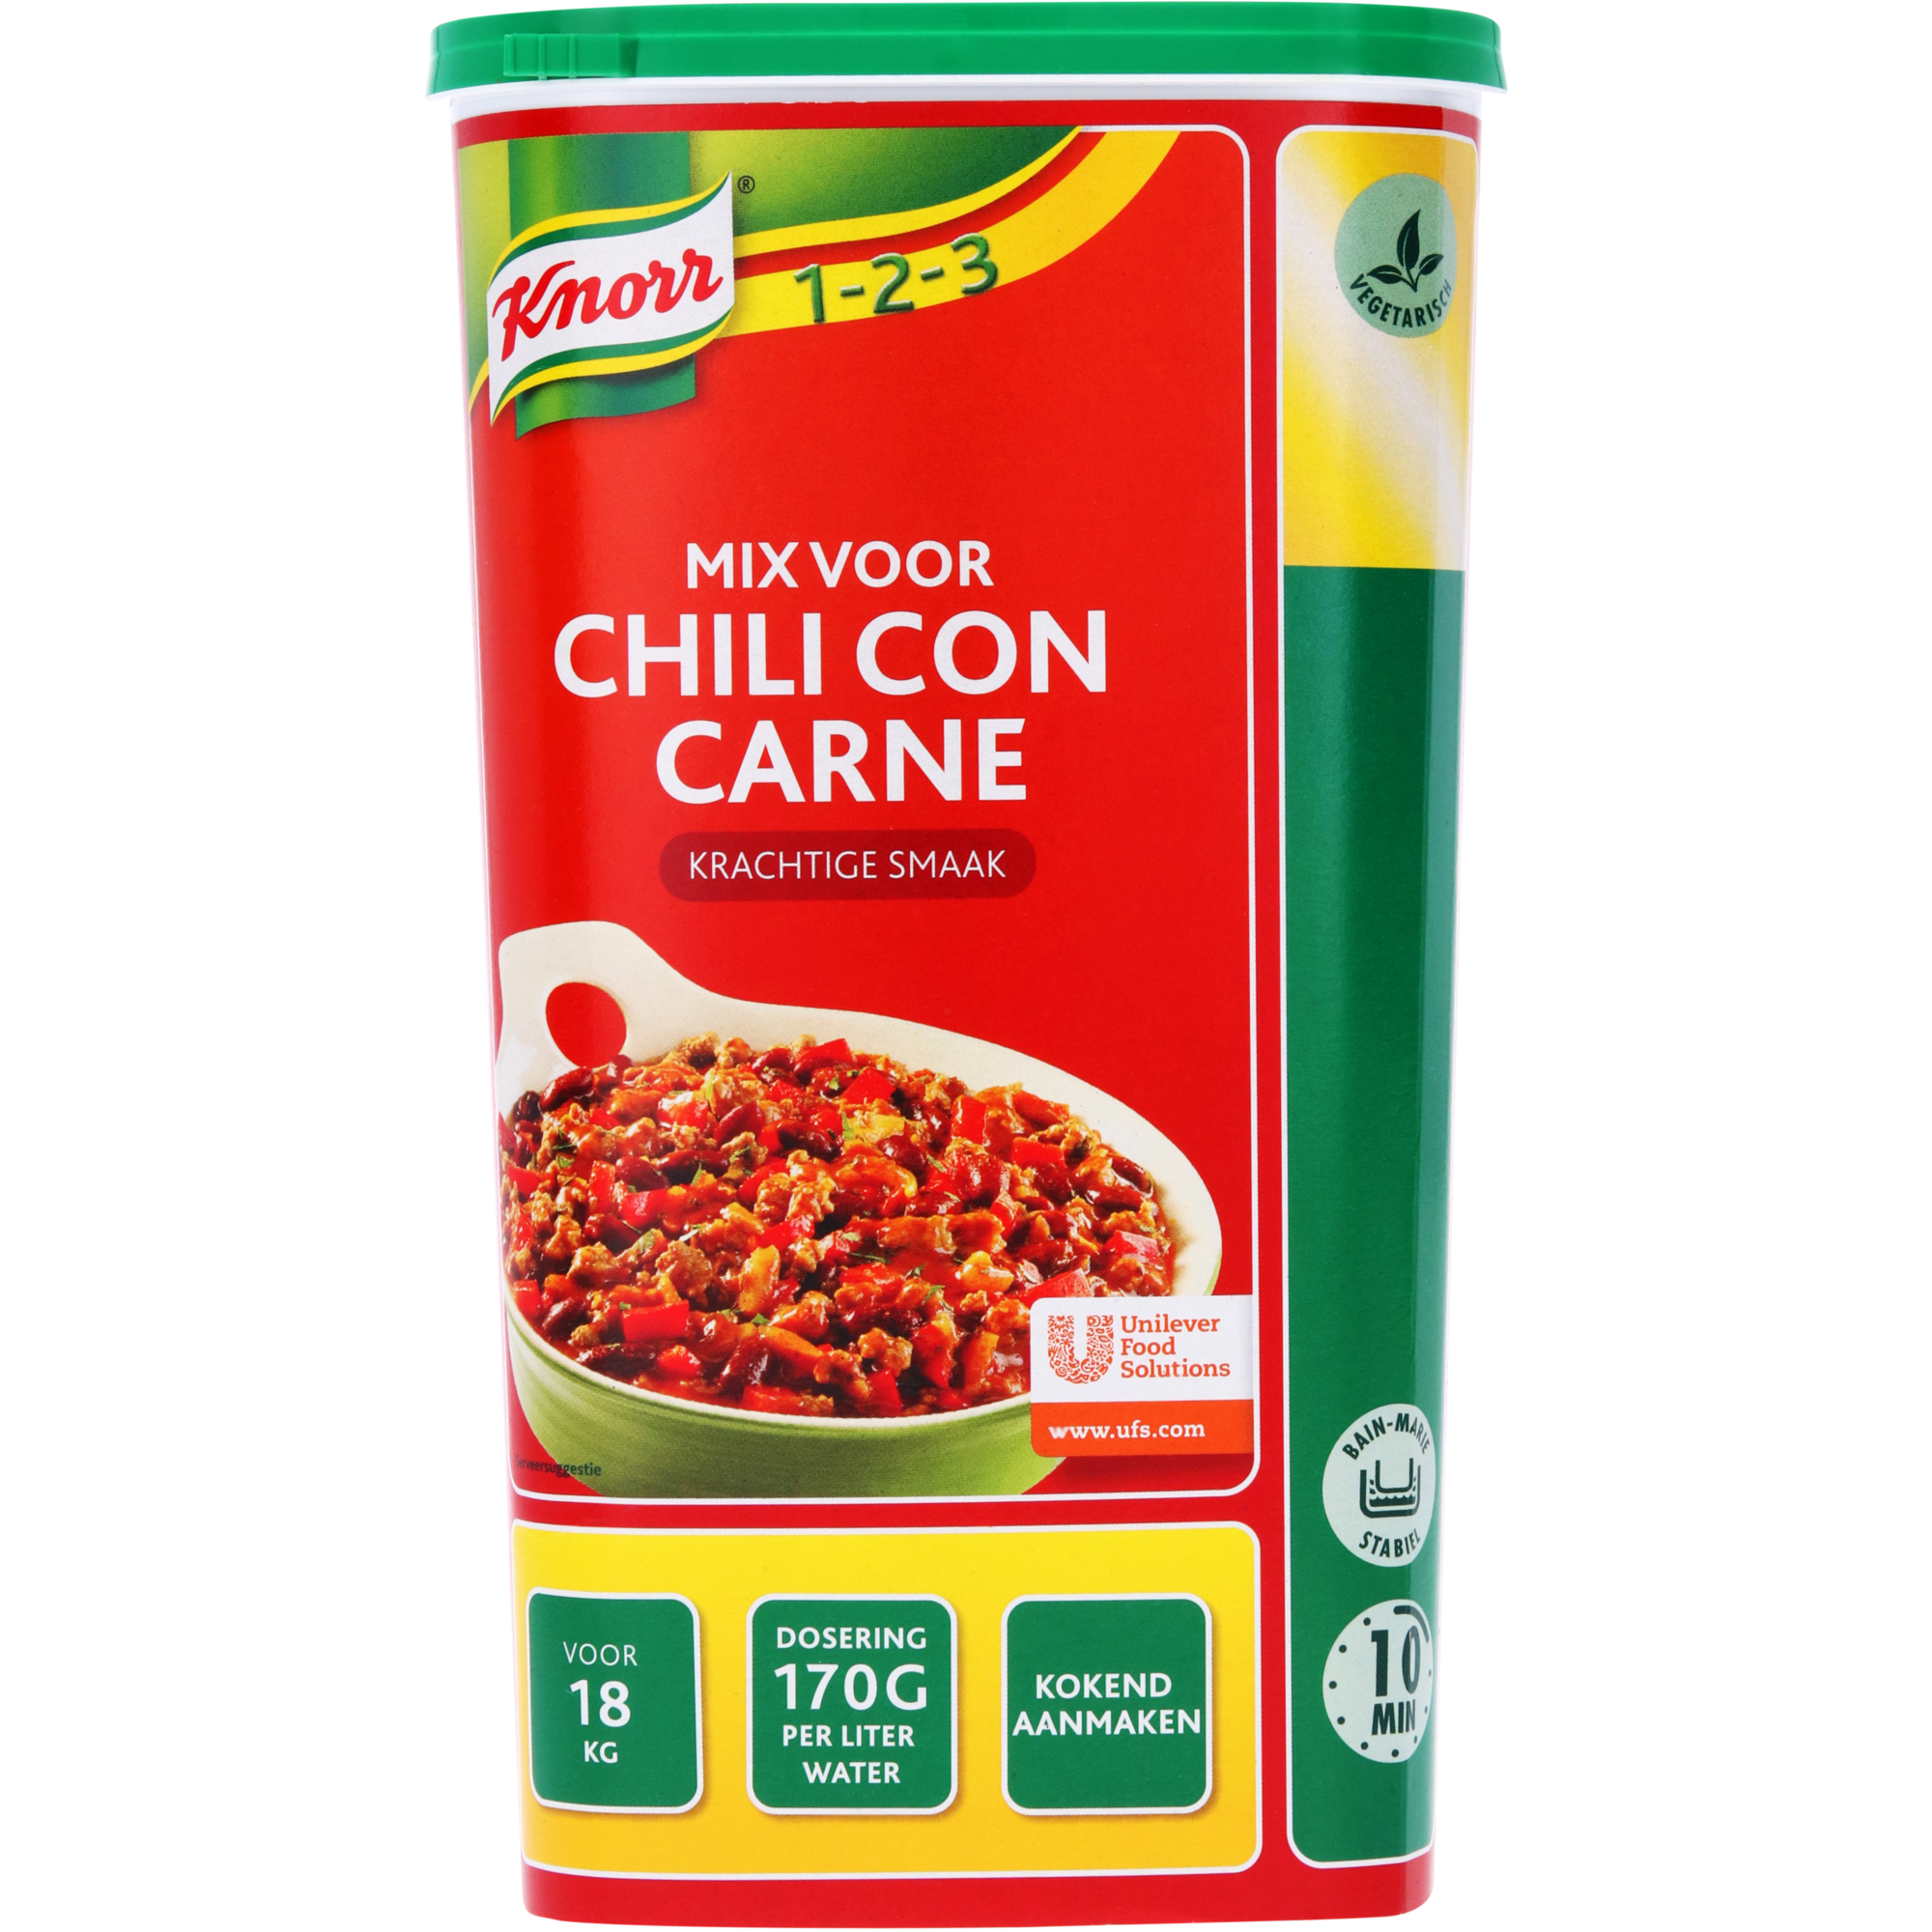 25849 Mix voor chili con carne 1,20 kg